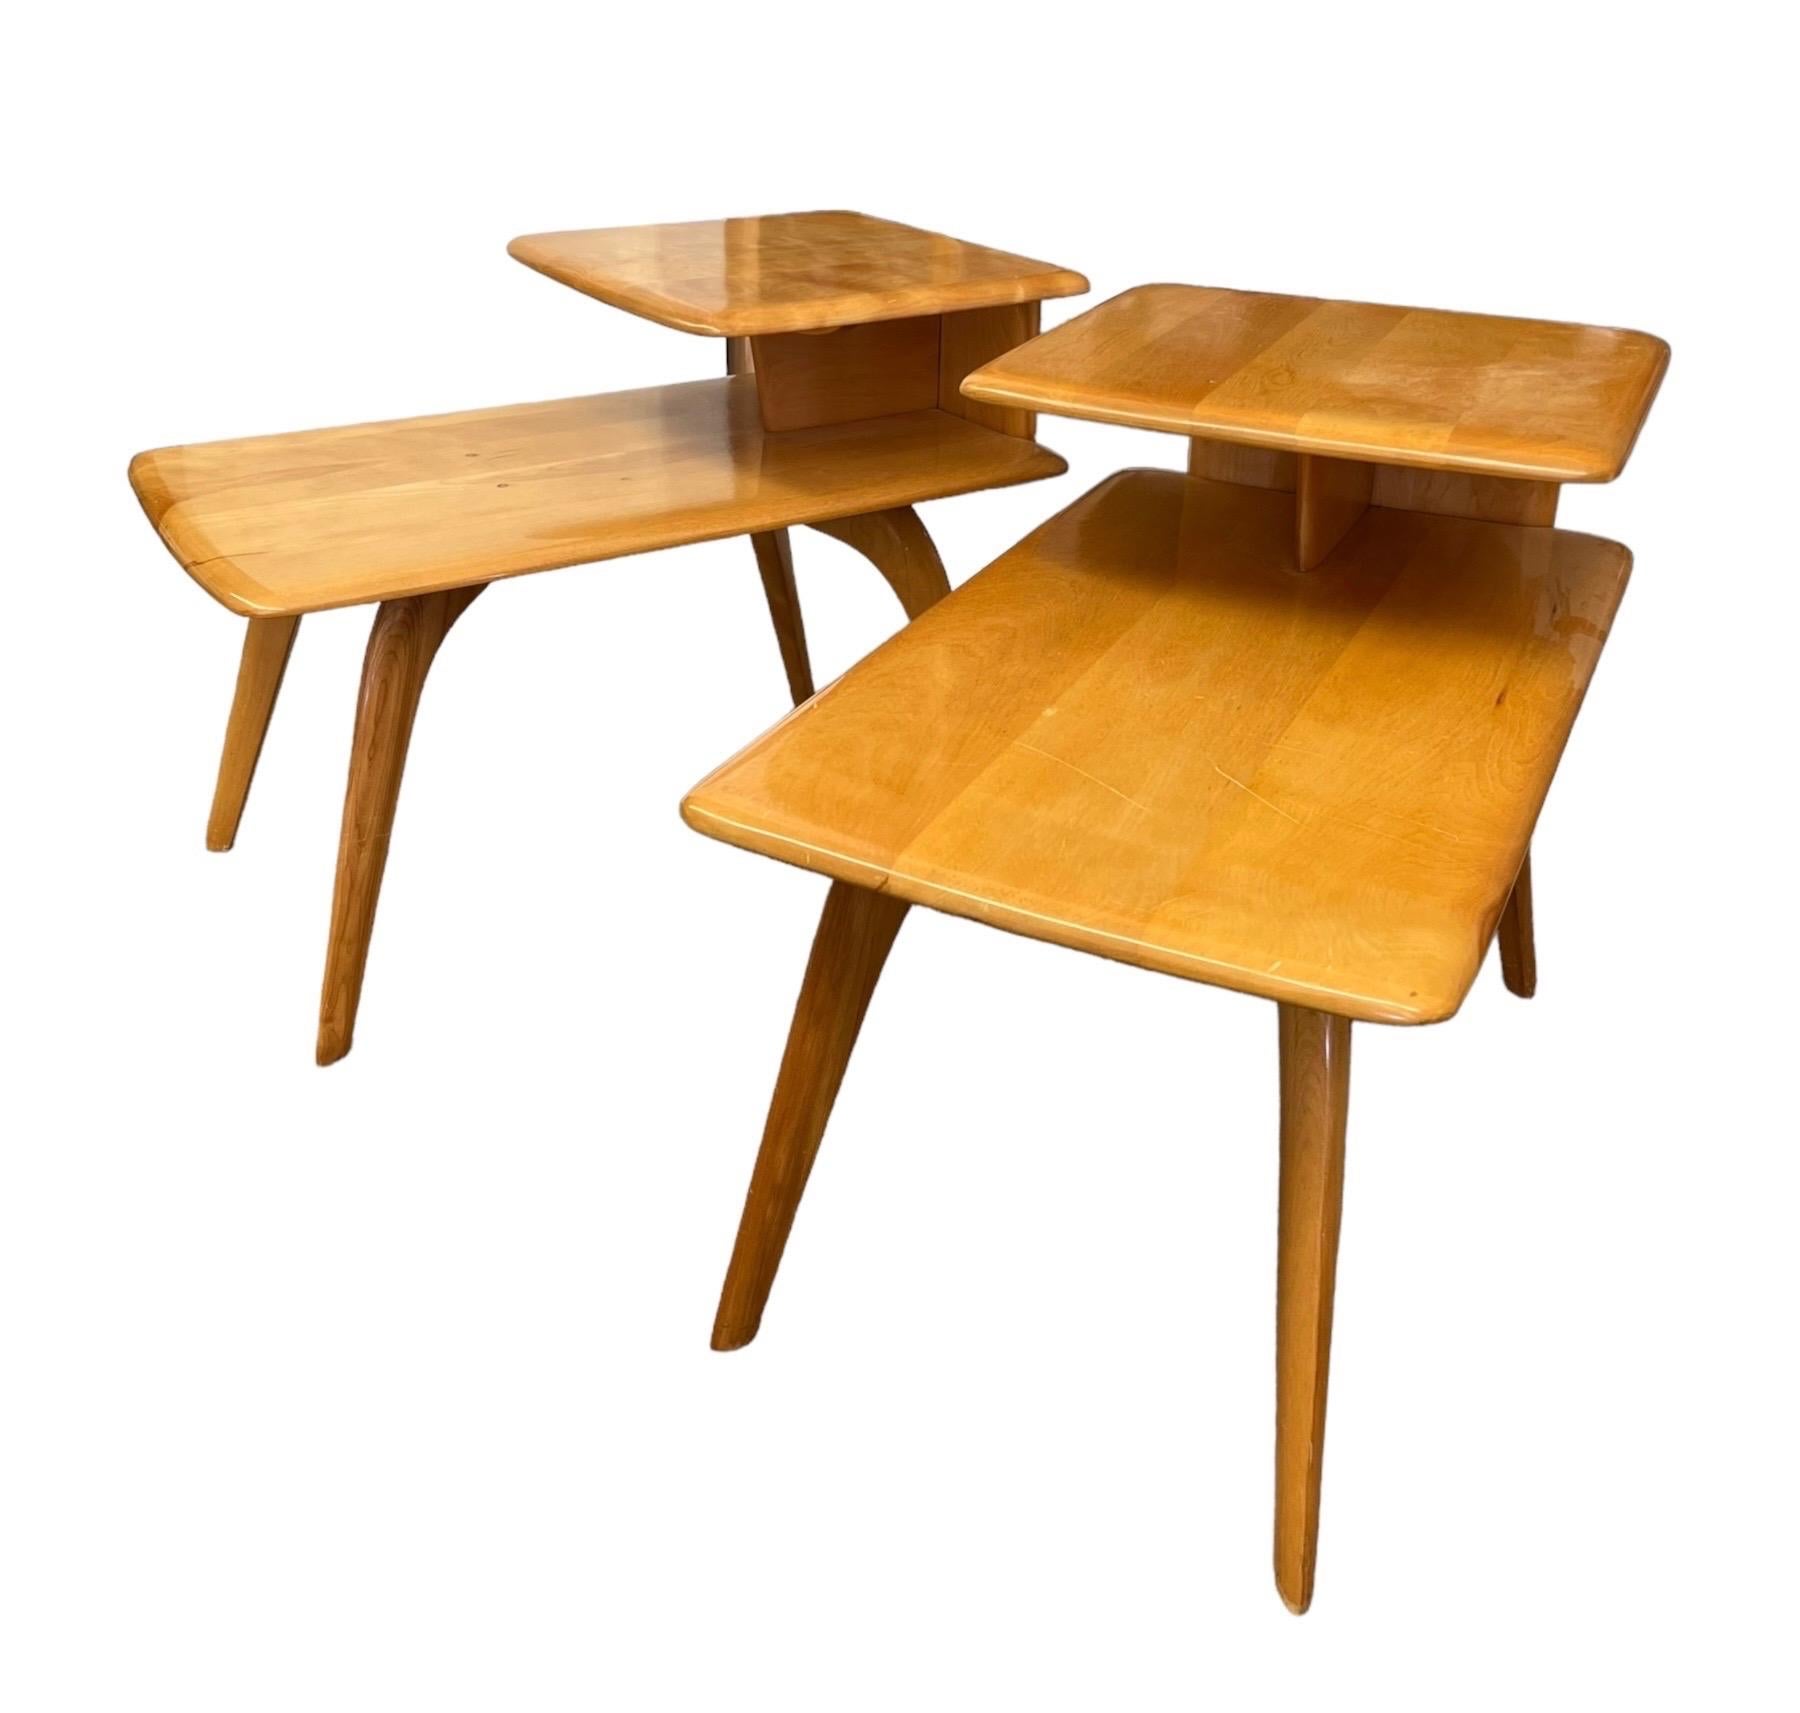 Vintage Mid Century Modern Solid Maple Step End Tables Set by Heywood Wakefield. The table retains original finish and in good overall condition. One table has wood-knot like marks, see pictures and video.

Dimensions. 17.25W 29.5D 22.5H overall
   